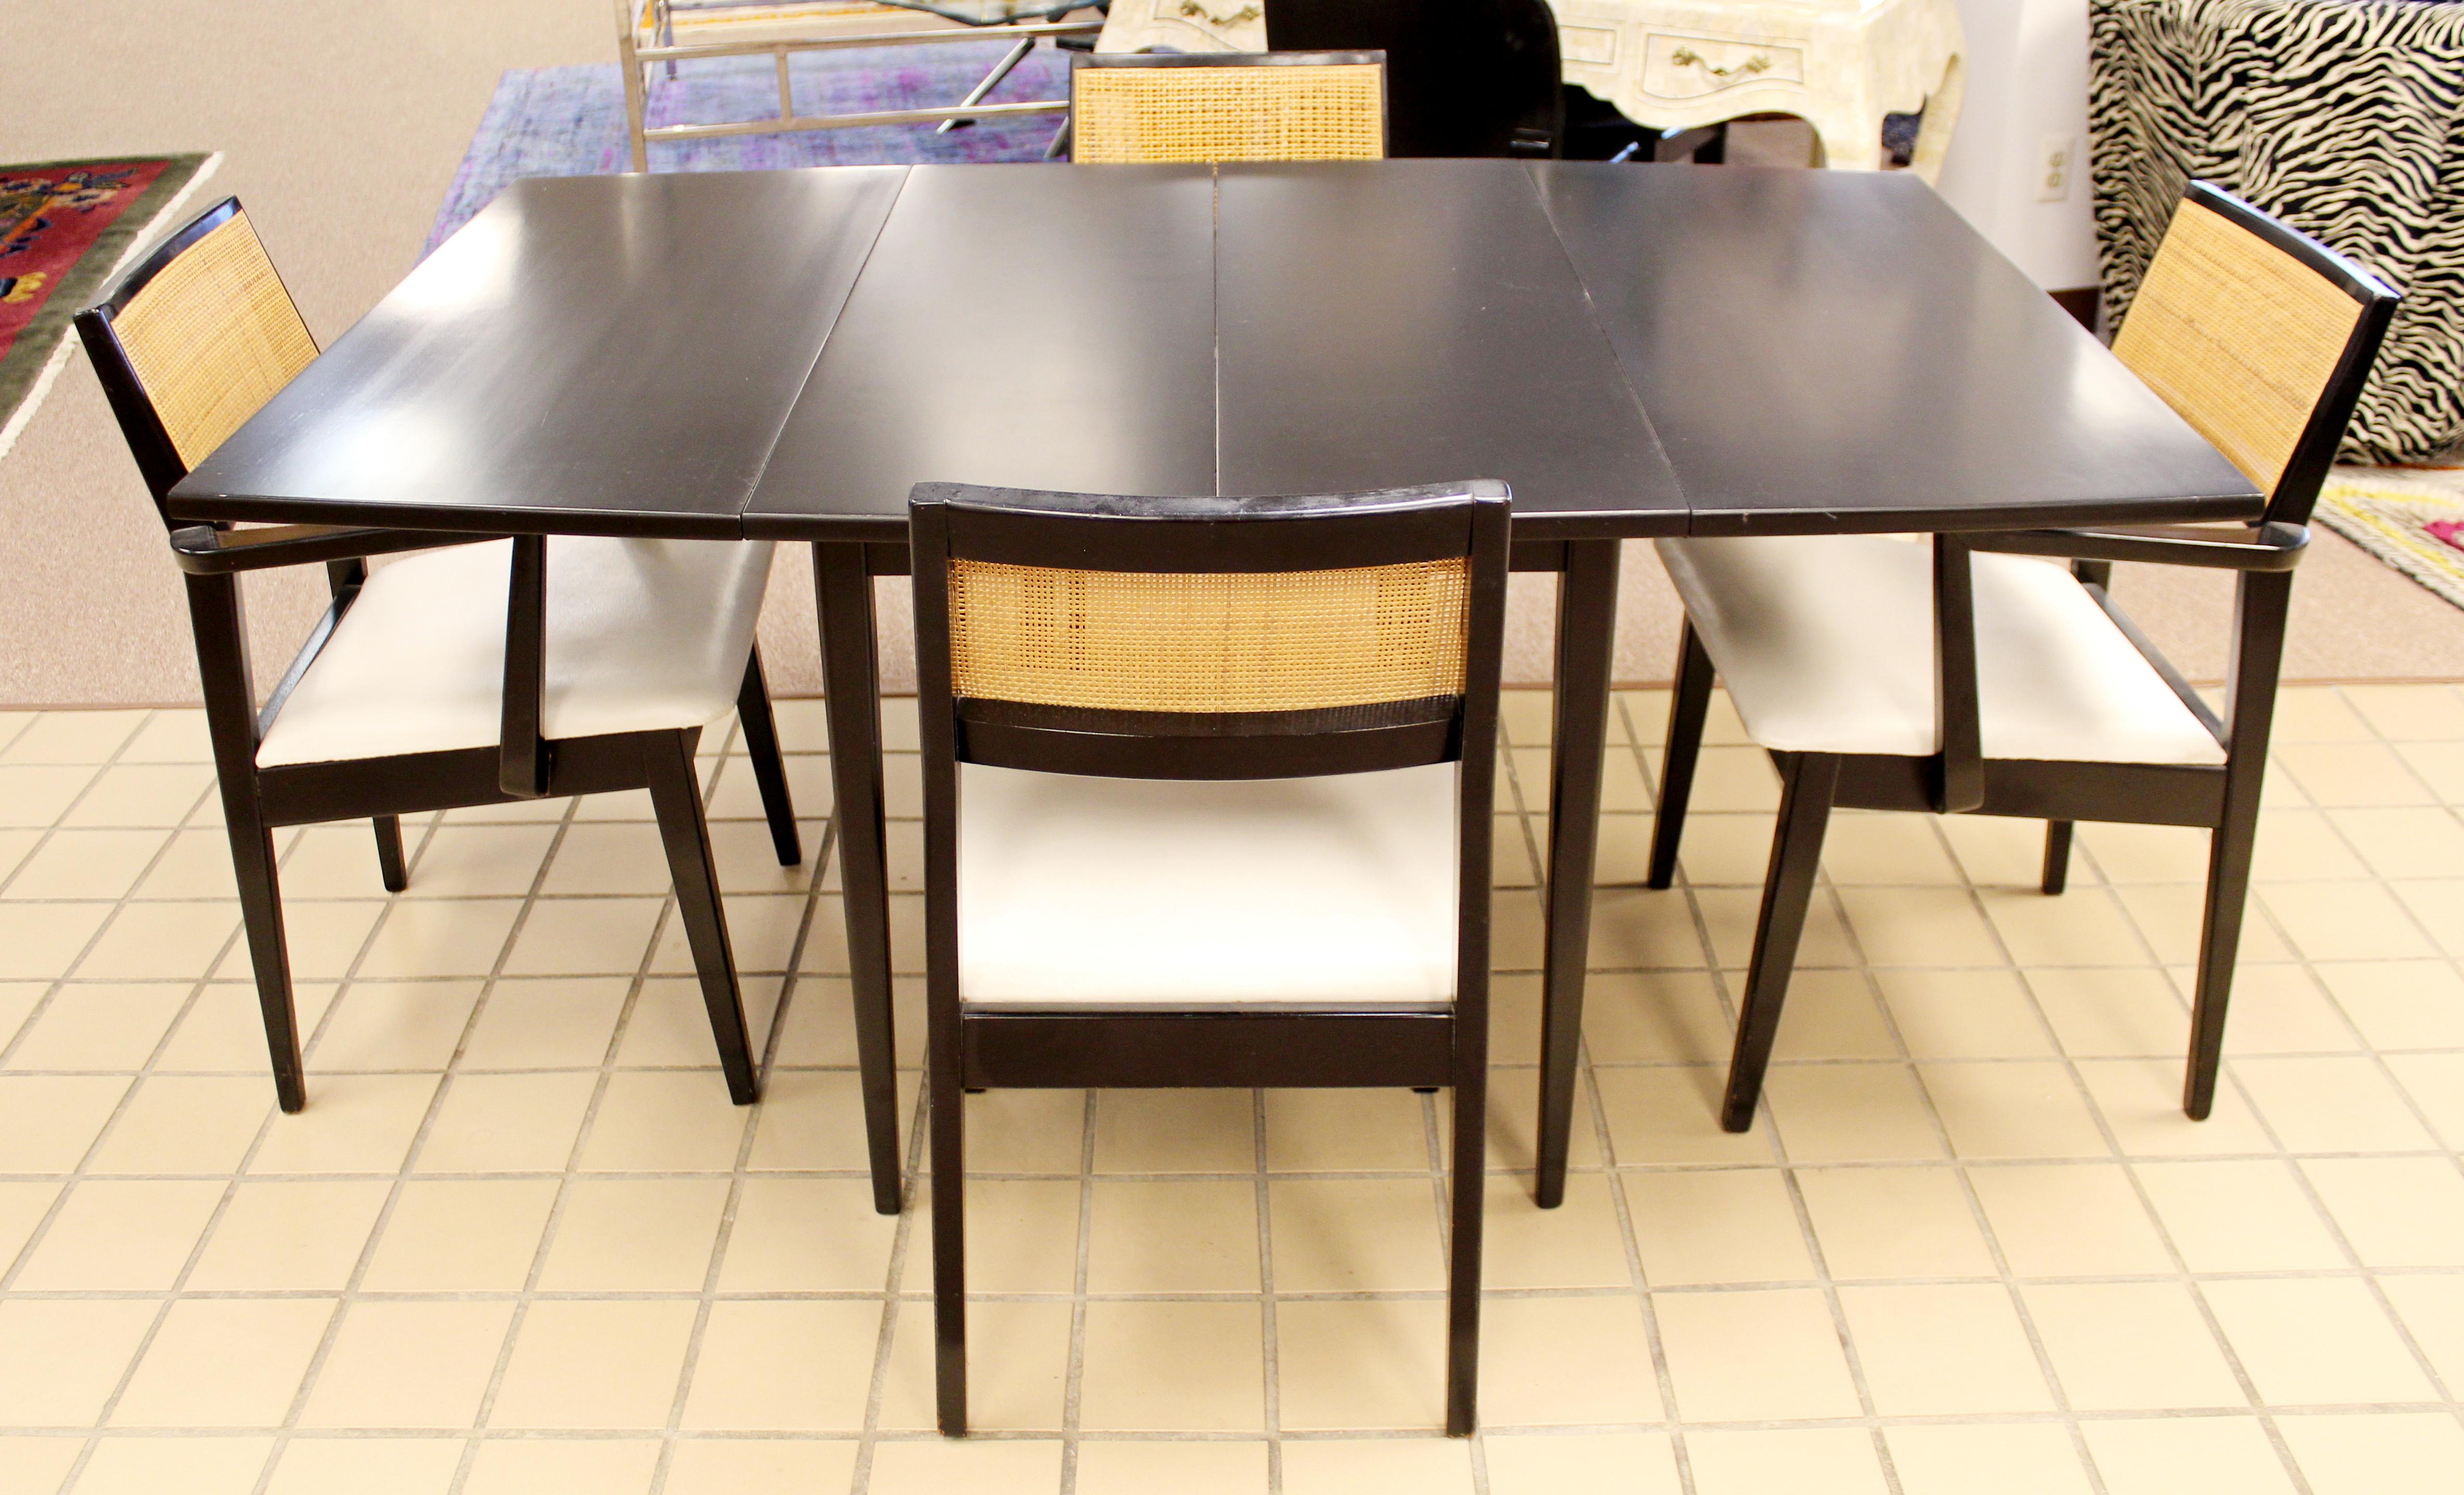 For your consideration is a wonderful dining or dinette set, including two side and two armchairs, and a rectangular table with three leaves, circa 1960s. In very good vintage condition. The dimensions of the table are 36